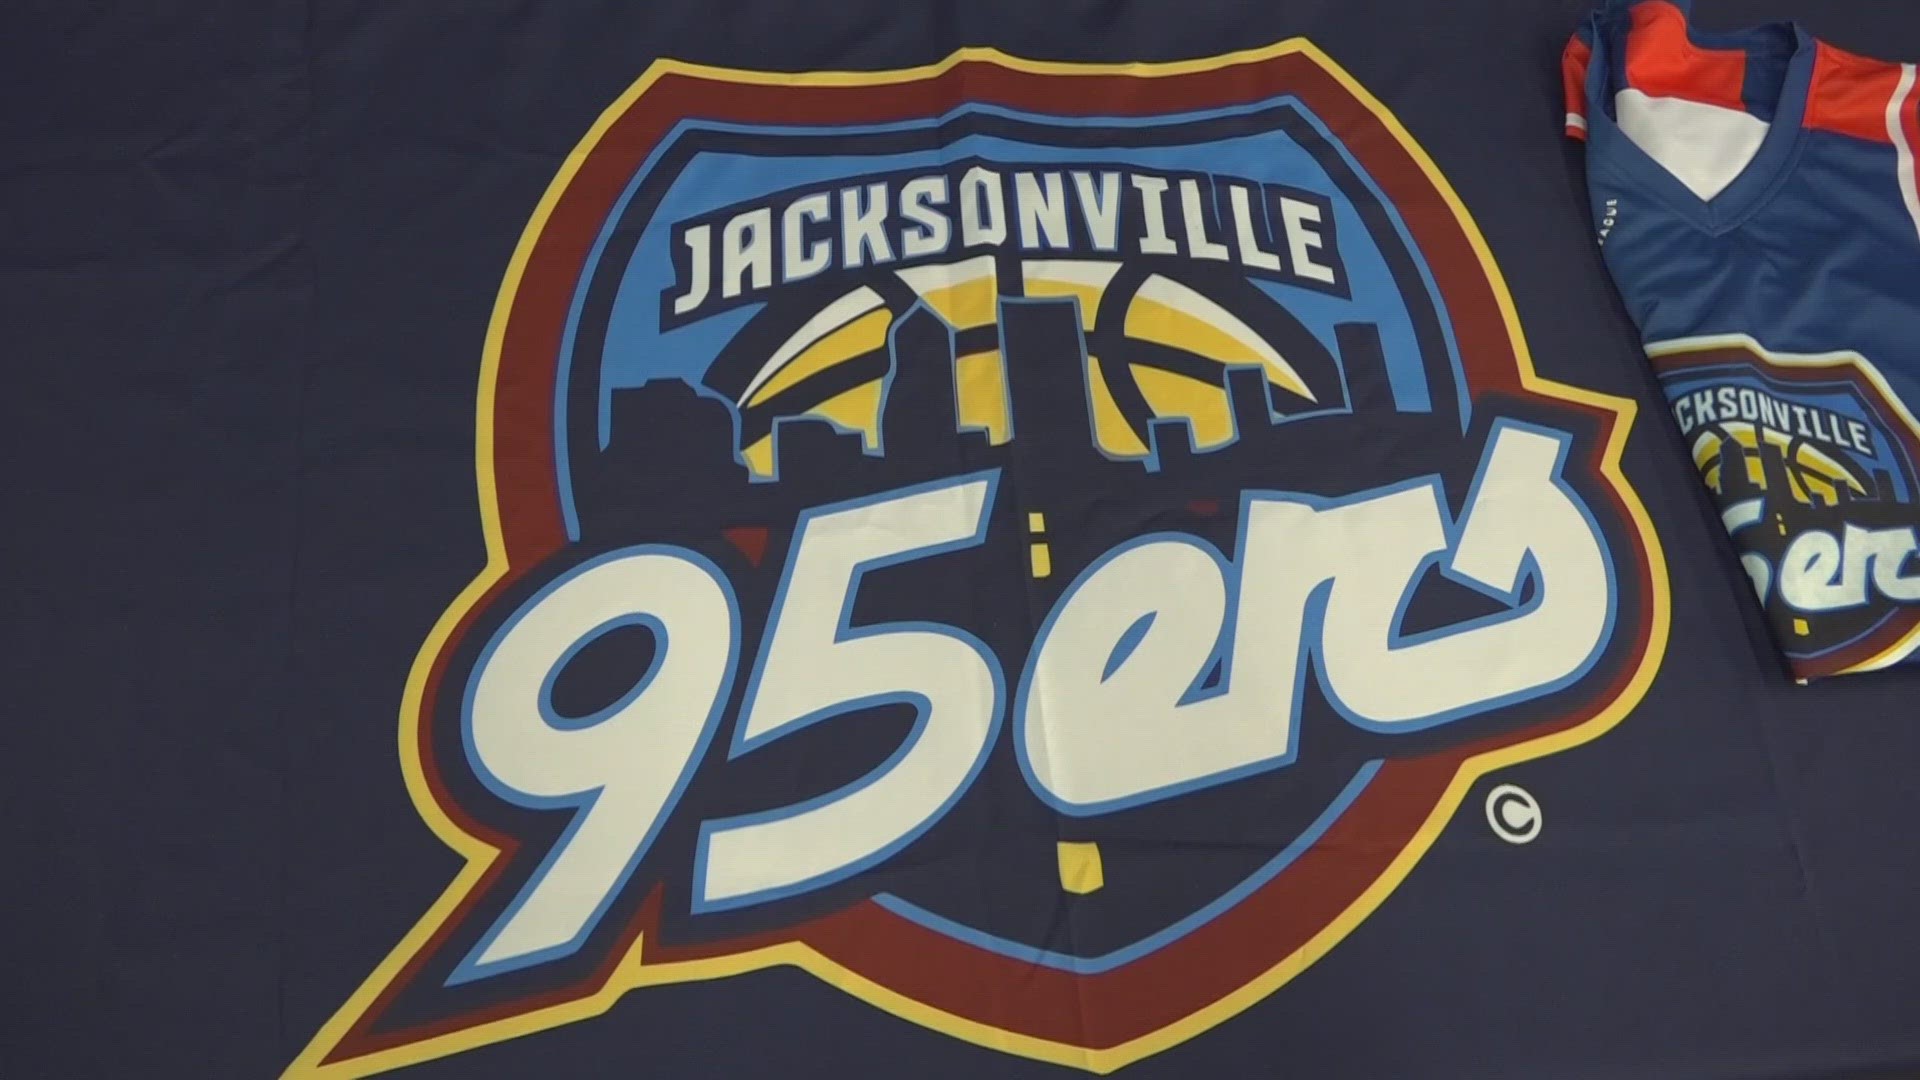 The Jacksonville 95ers is the city's newest pro basketball franchise and will play its first game in March 2024 at its new home, JU.